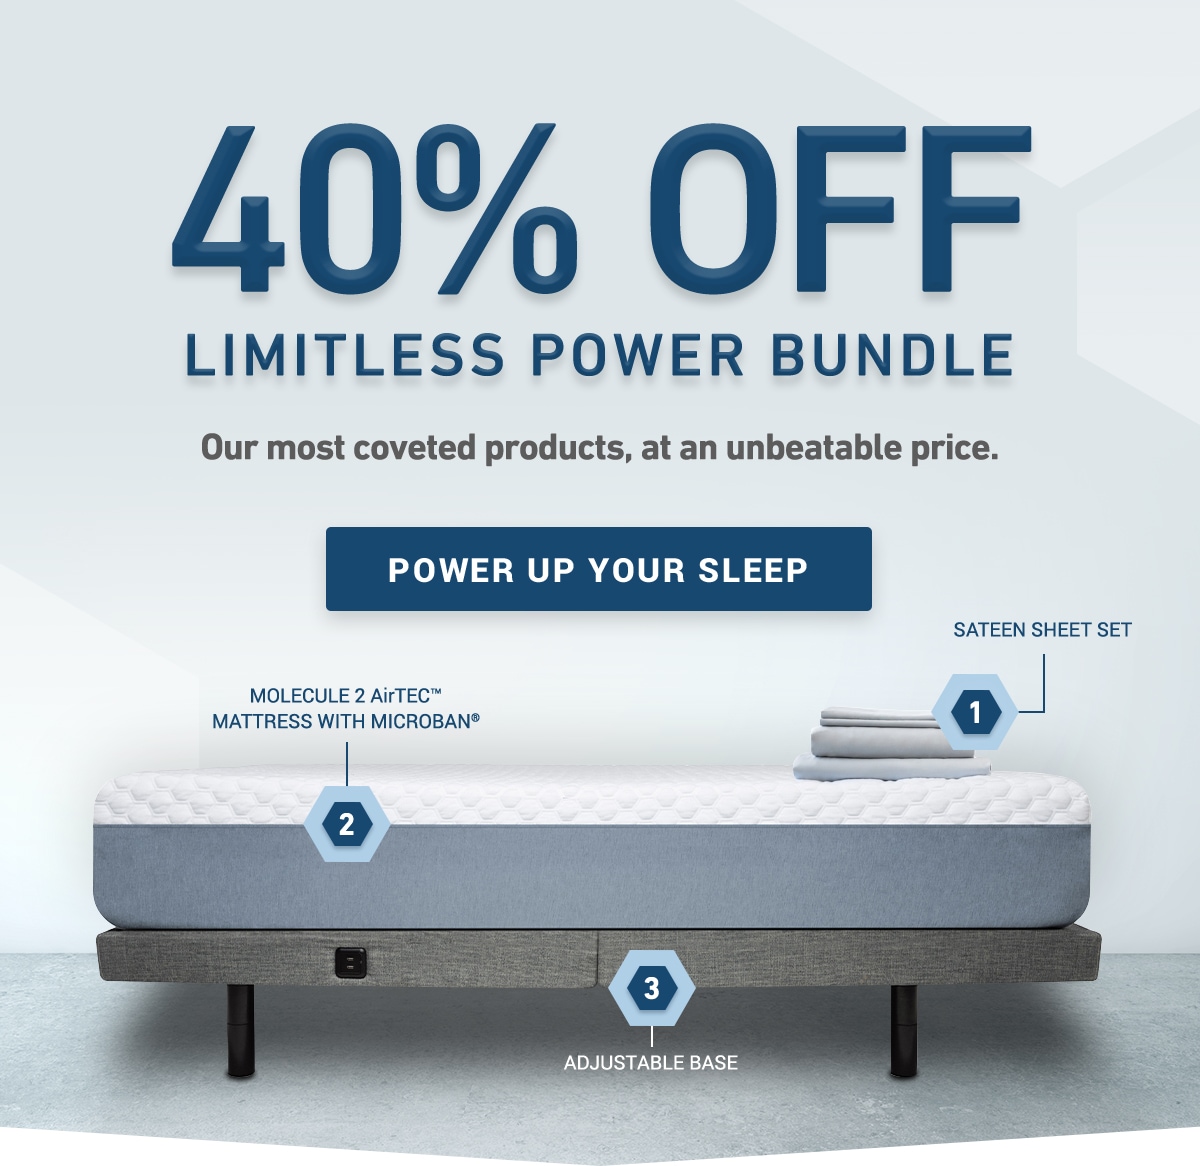 40% OFF the Limitless Power Bundle. Our most coveted products, at an unbeatable price.